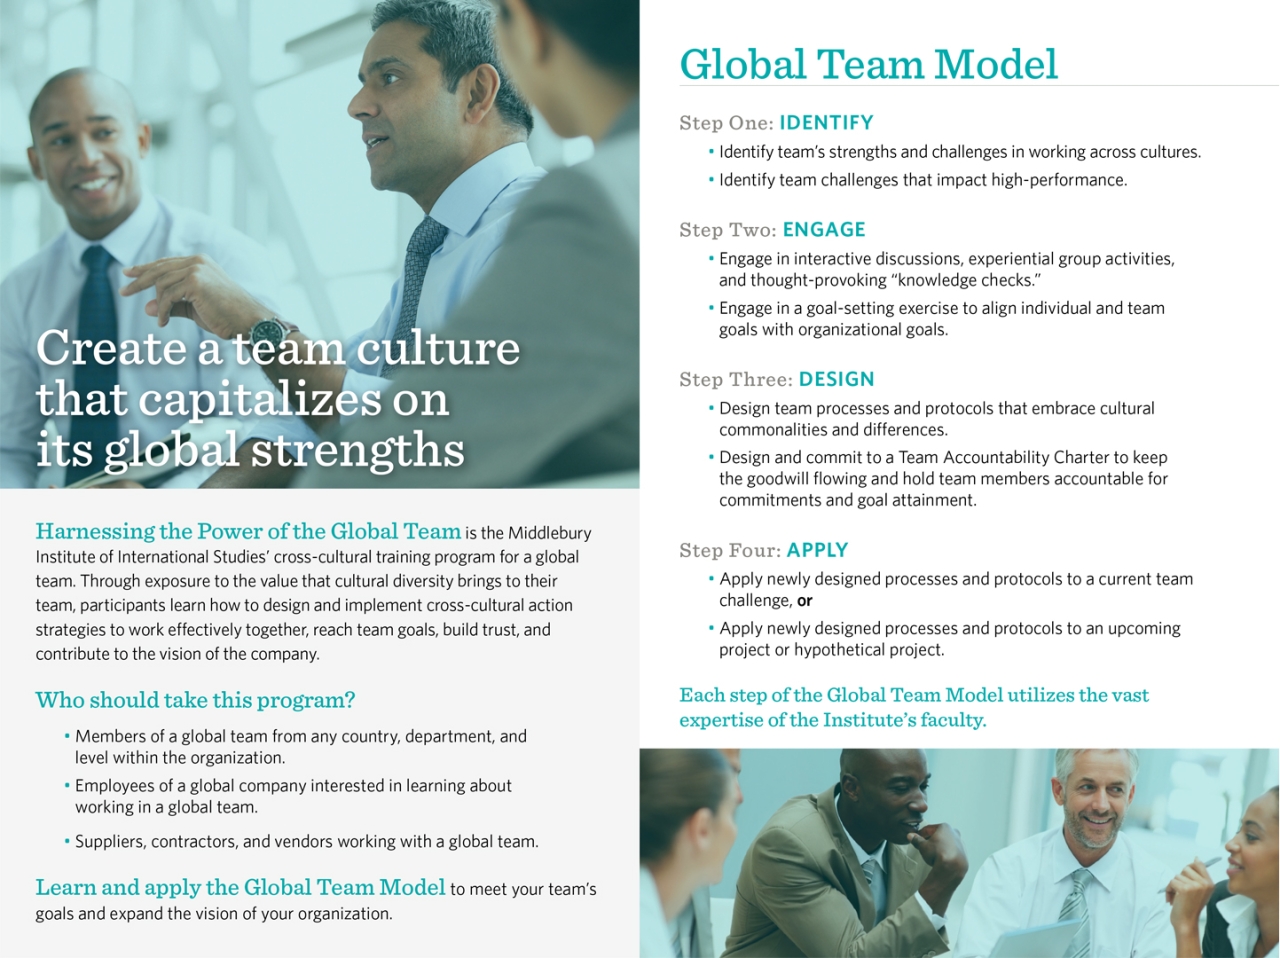 Custom Language Services brochure, explaining the audience and curriculum model for the cross-cultural training program, Harnessing the Power of the Global Team